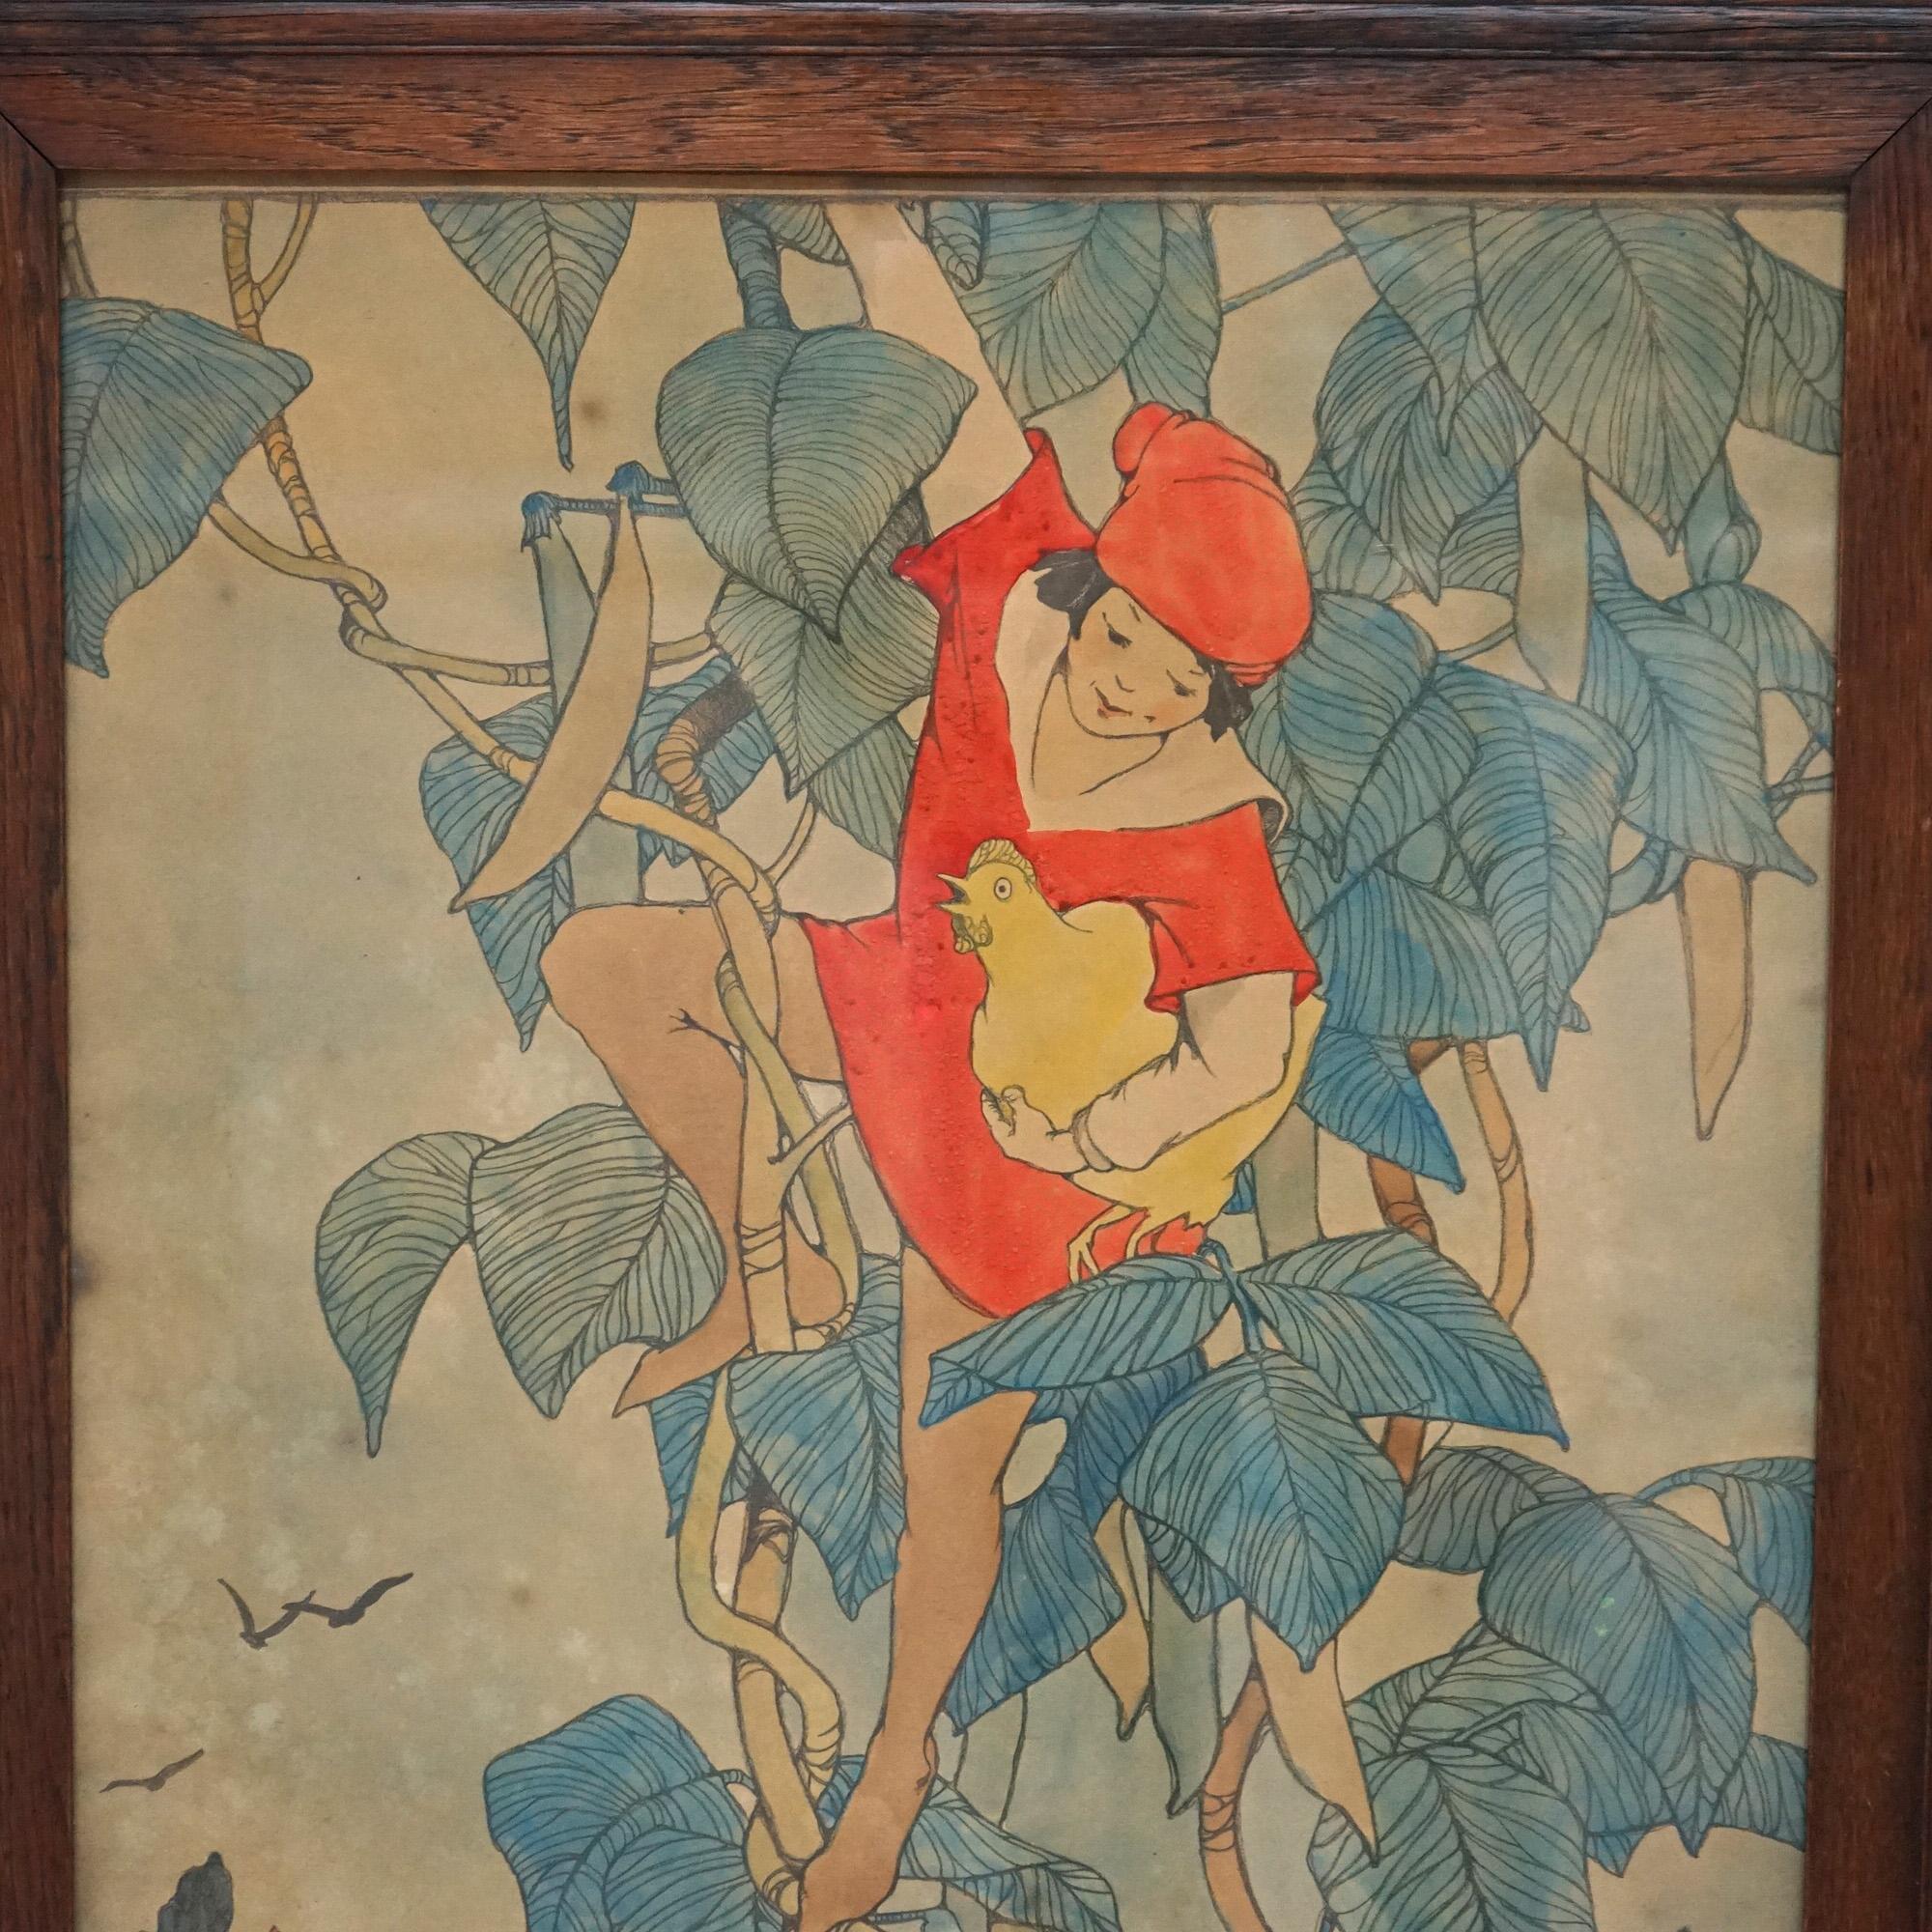 Antique Elizabeth Tyler Lithograph “Jack And The Beanstalk”, Framed, C1920

Measures- 30''H x 24.5''W x 1.25''D; 26'' x 20.5'' sight